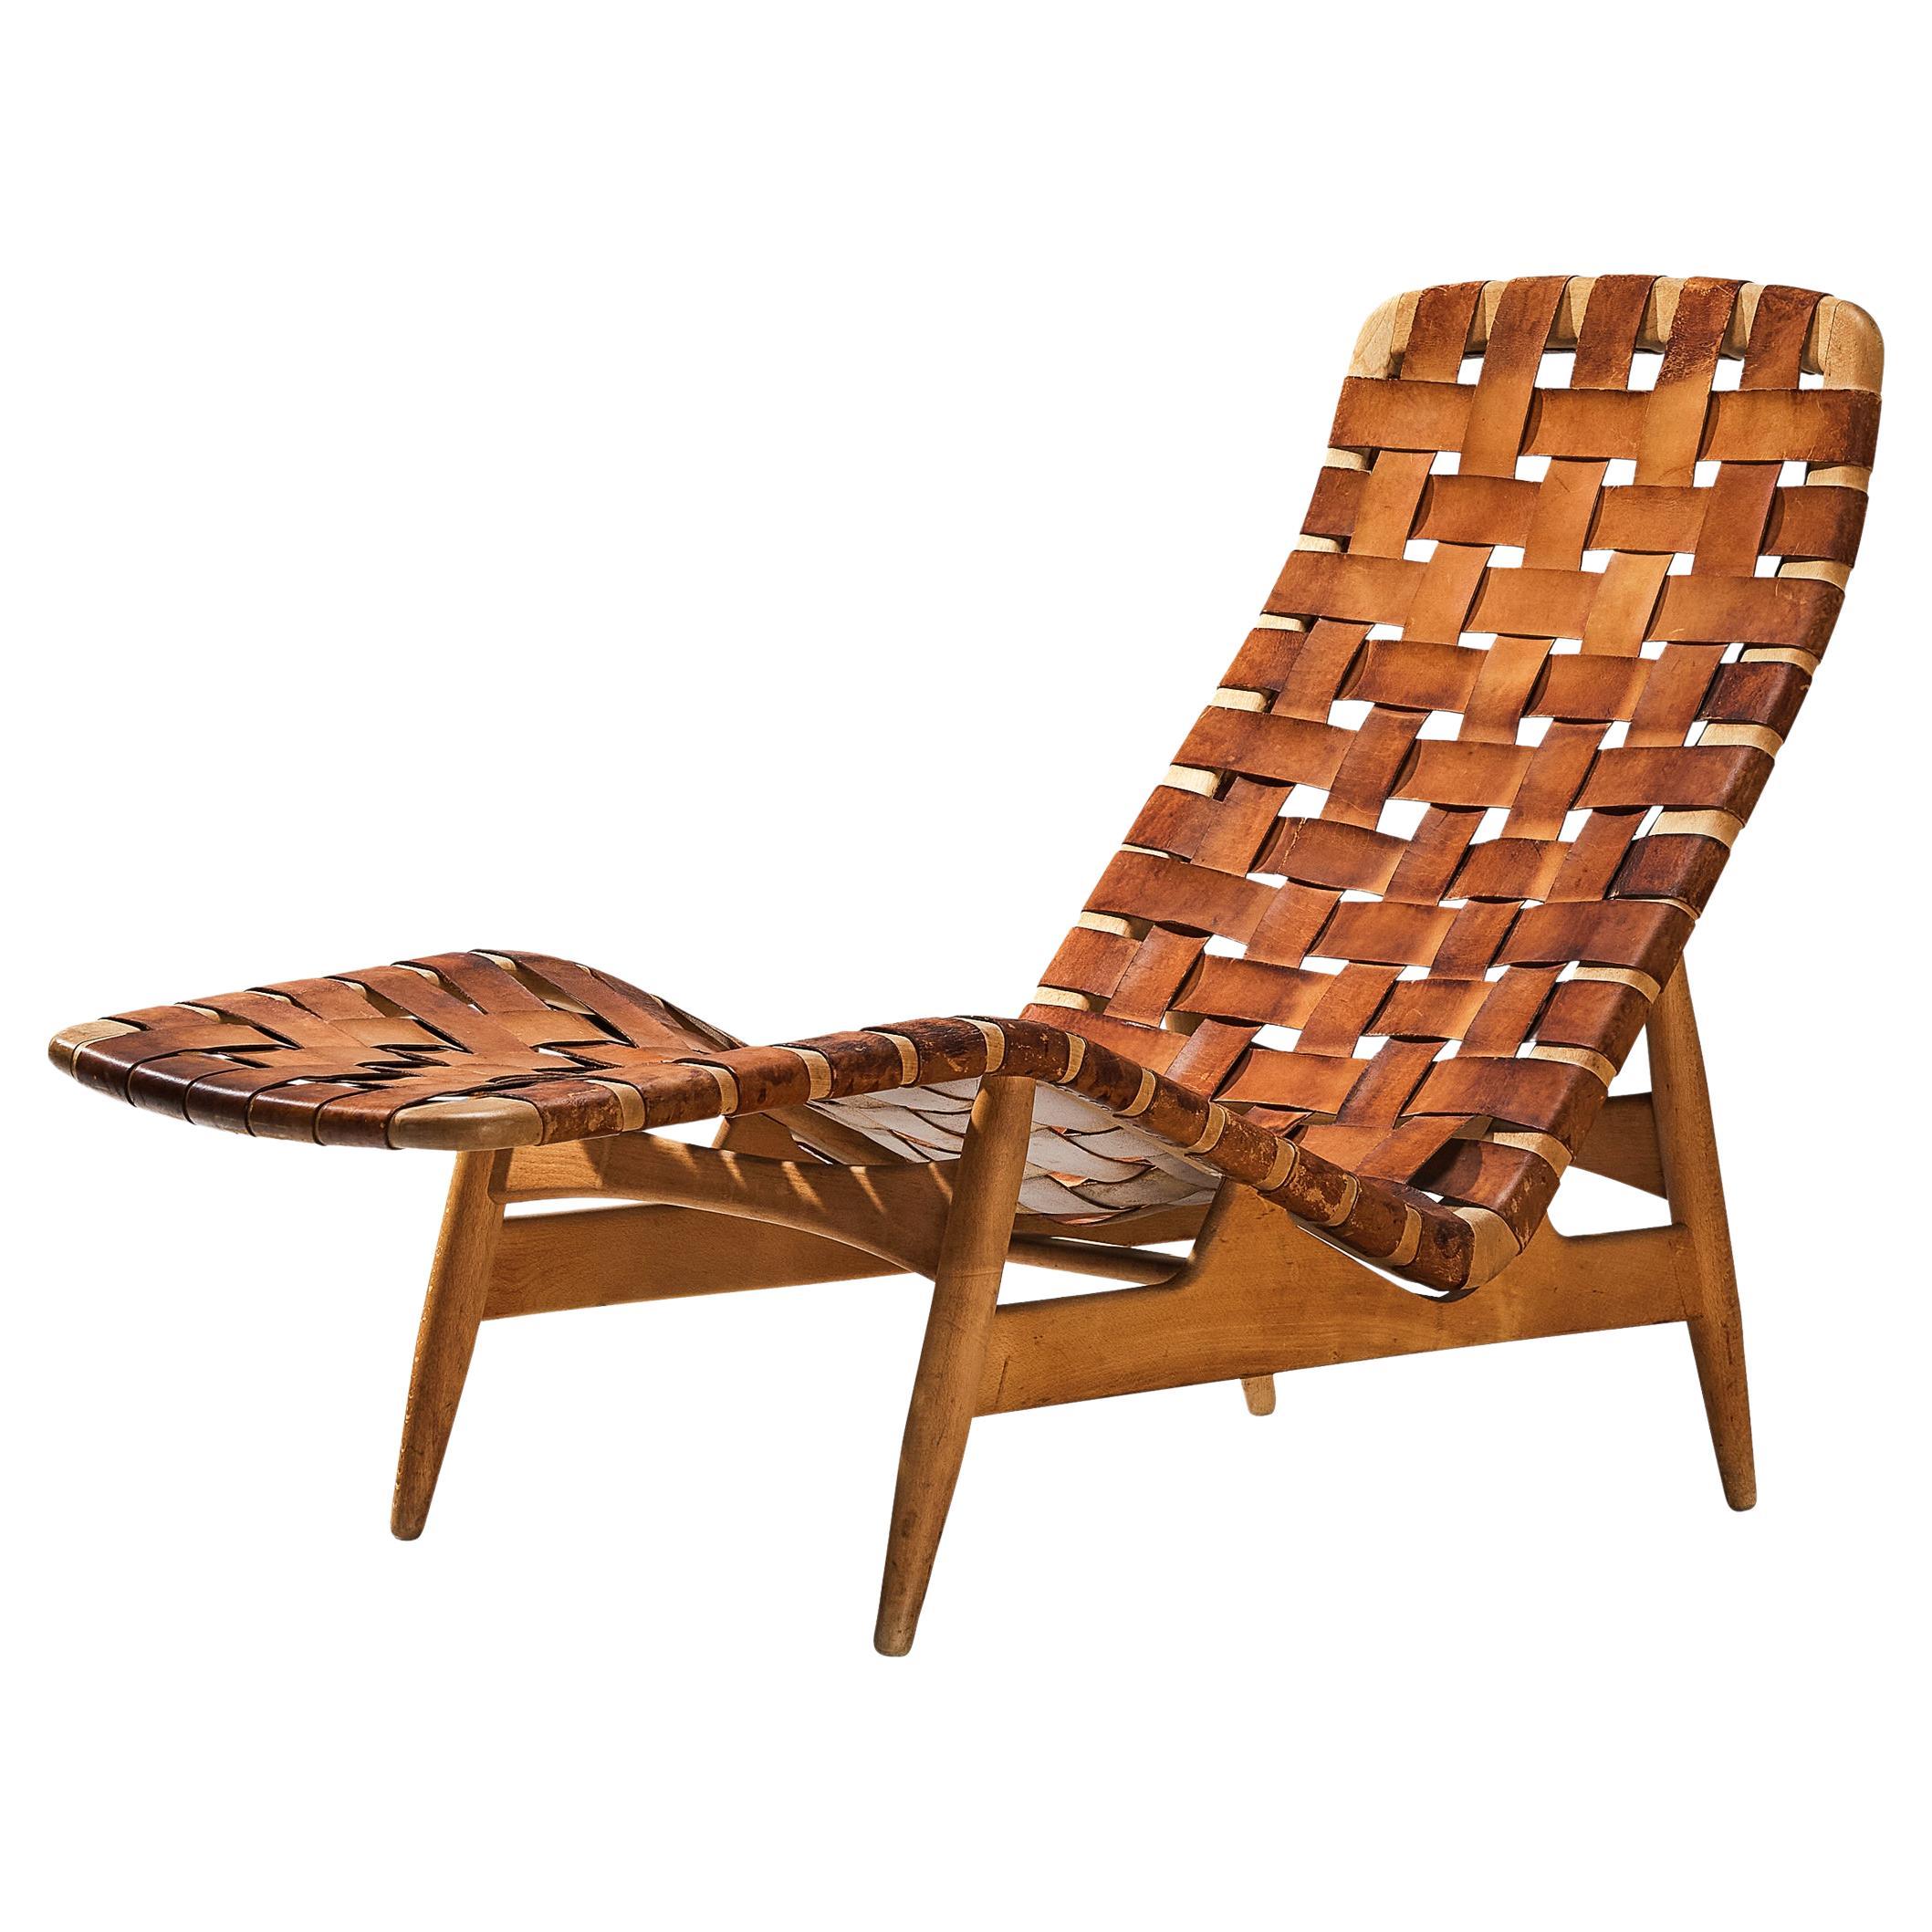 Arne Vodder for Bovirke Chaise Longue in Patinated Cognac Leather 